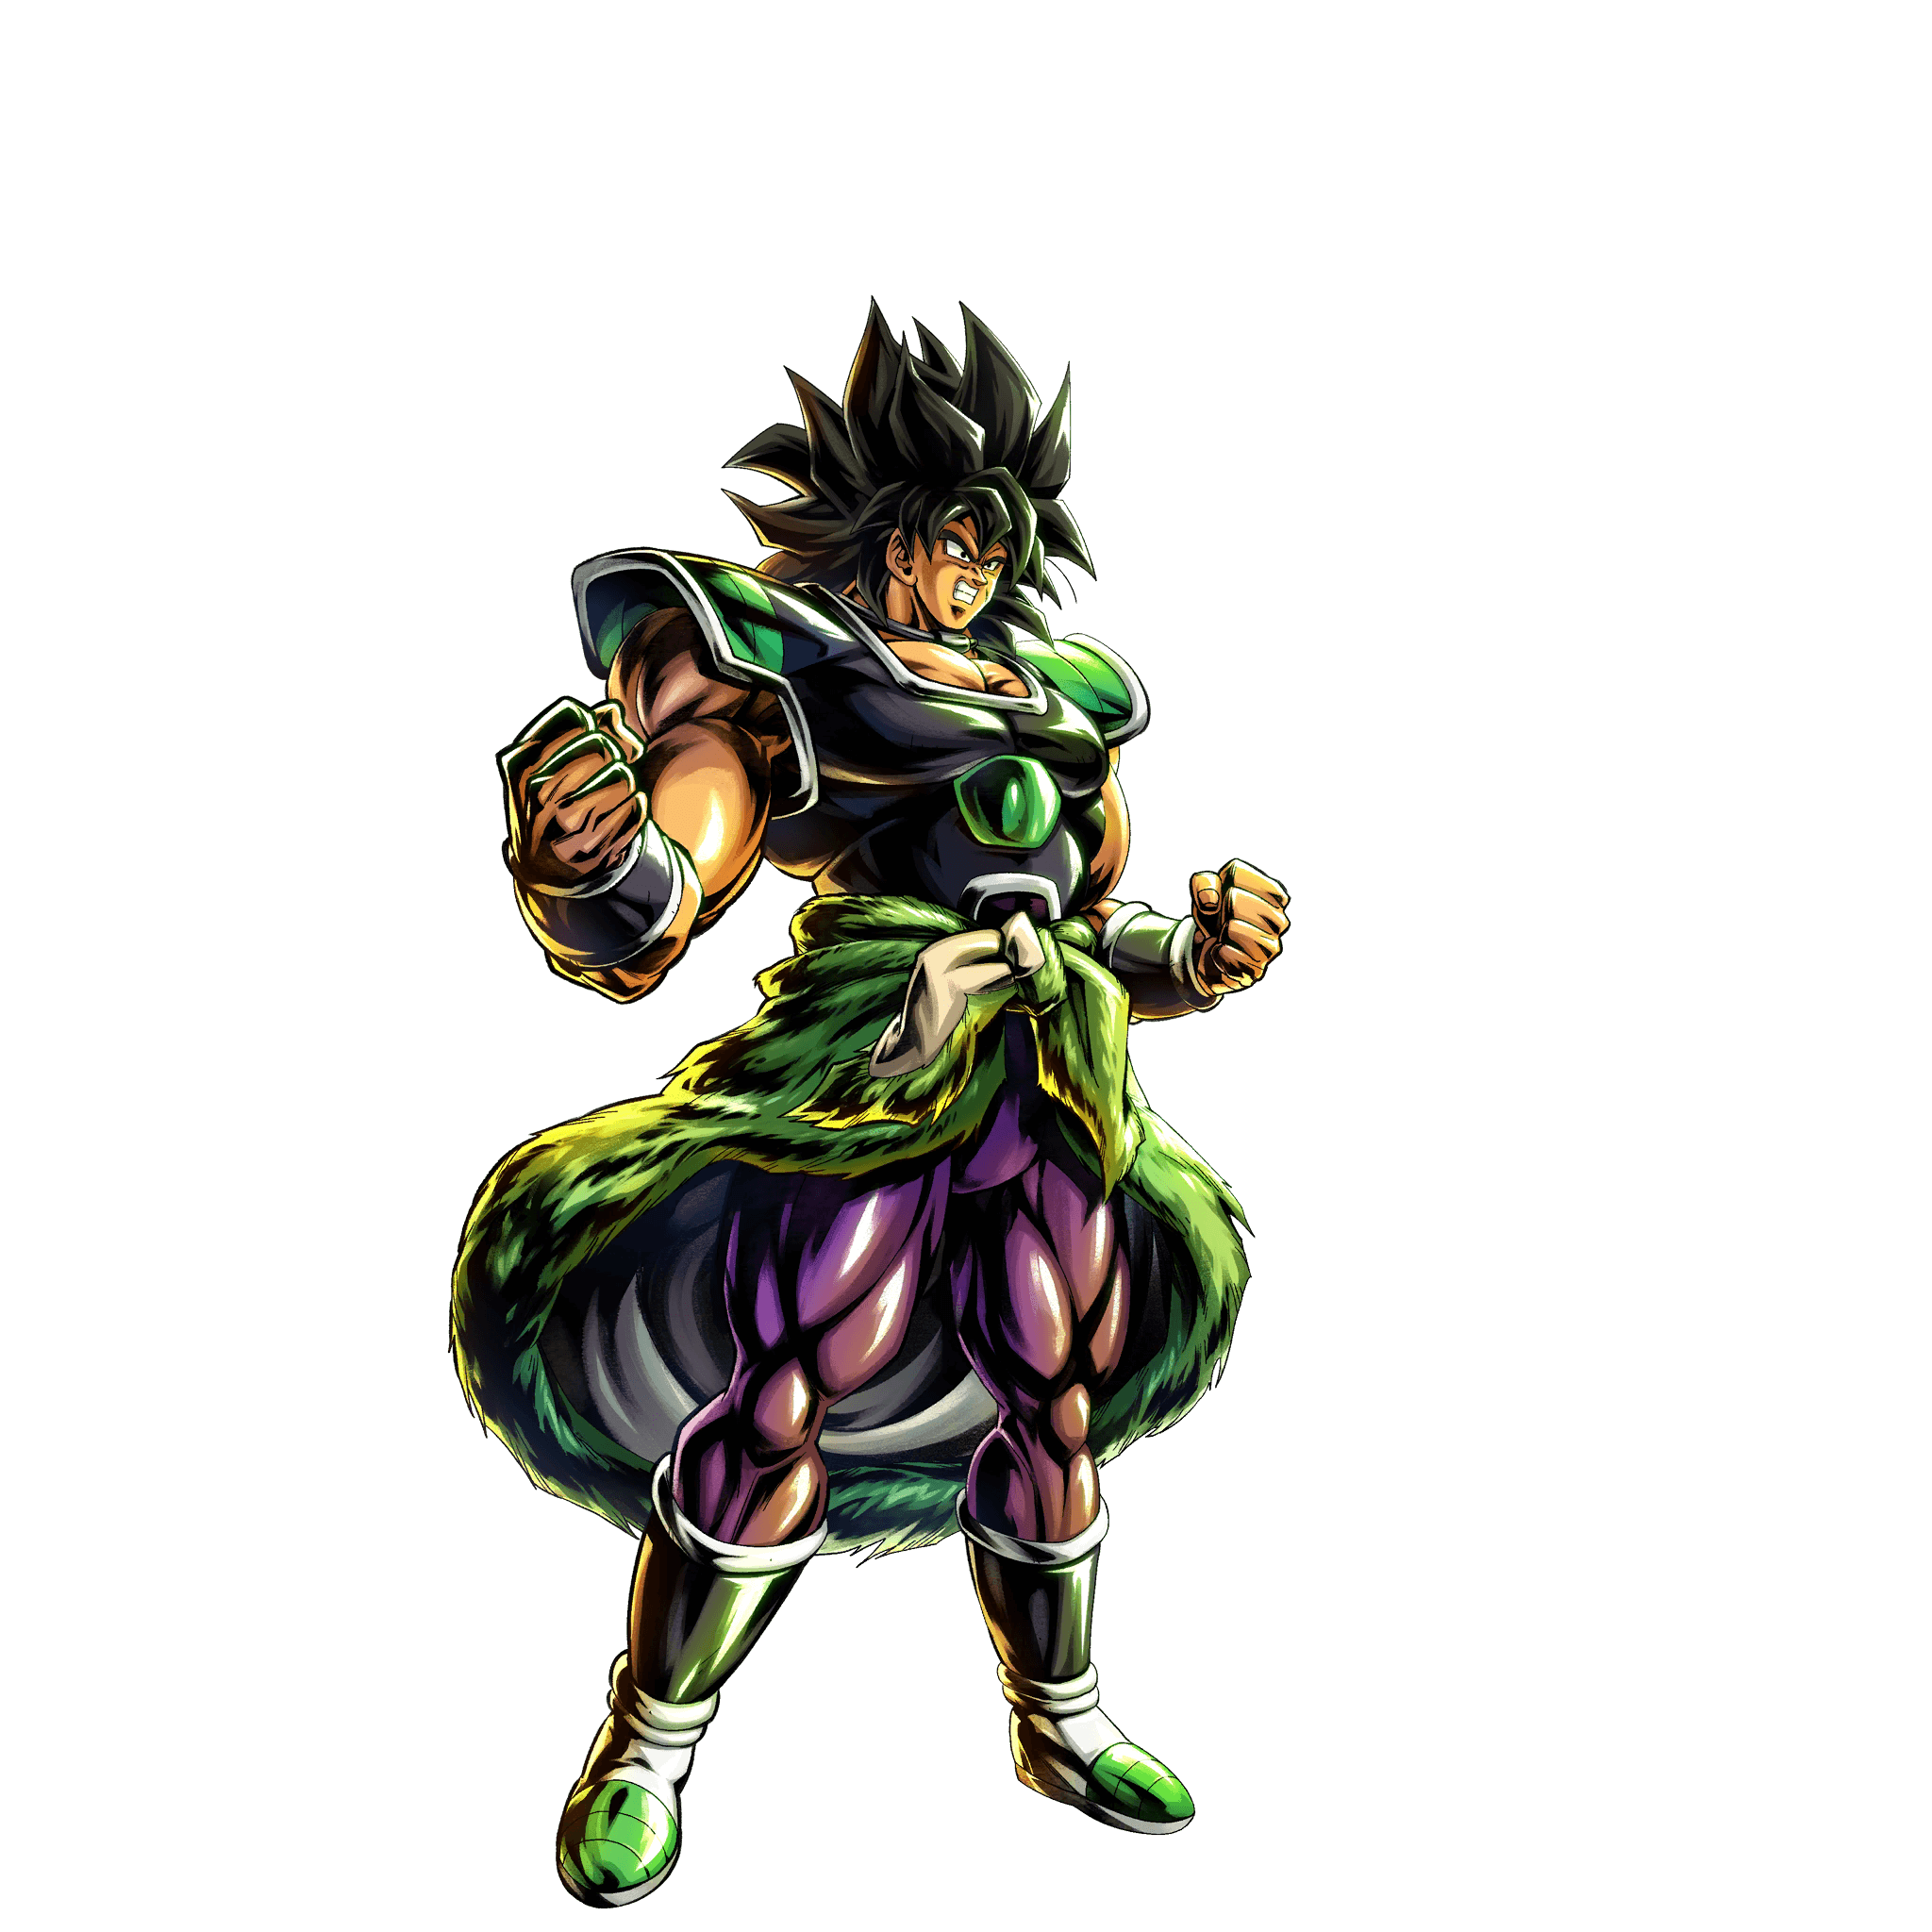 Broly, Wiki The King of Cartoons